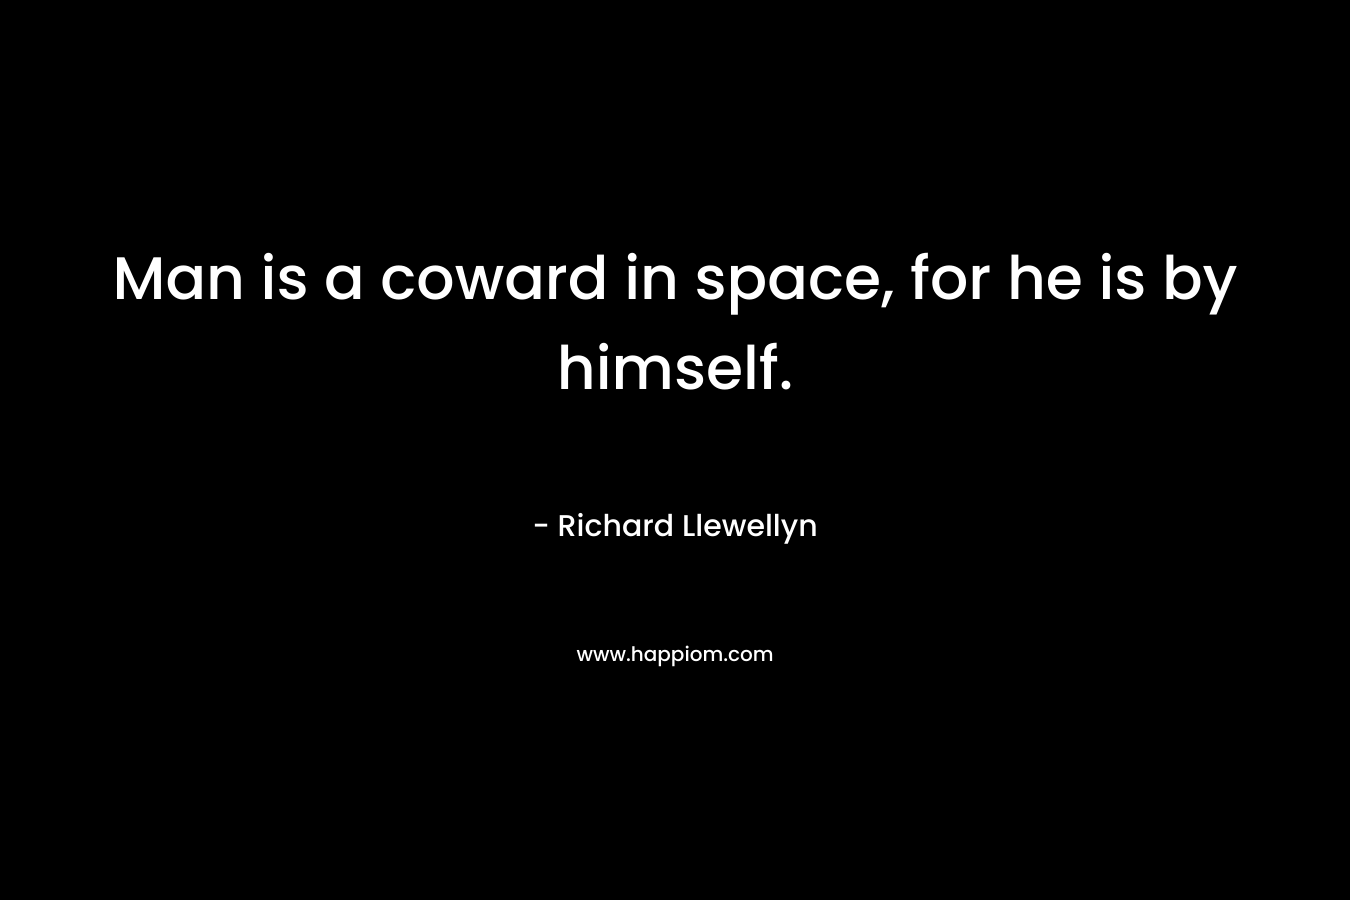 Man is a coward in space, for he is by himself.